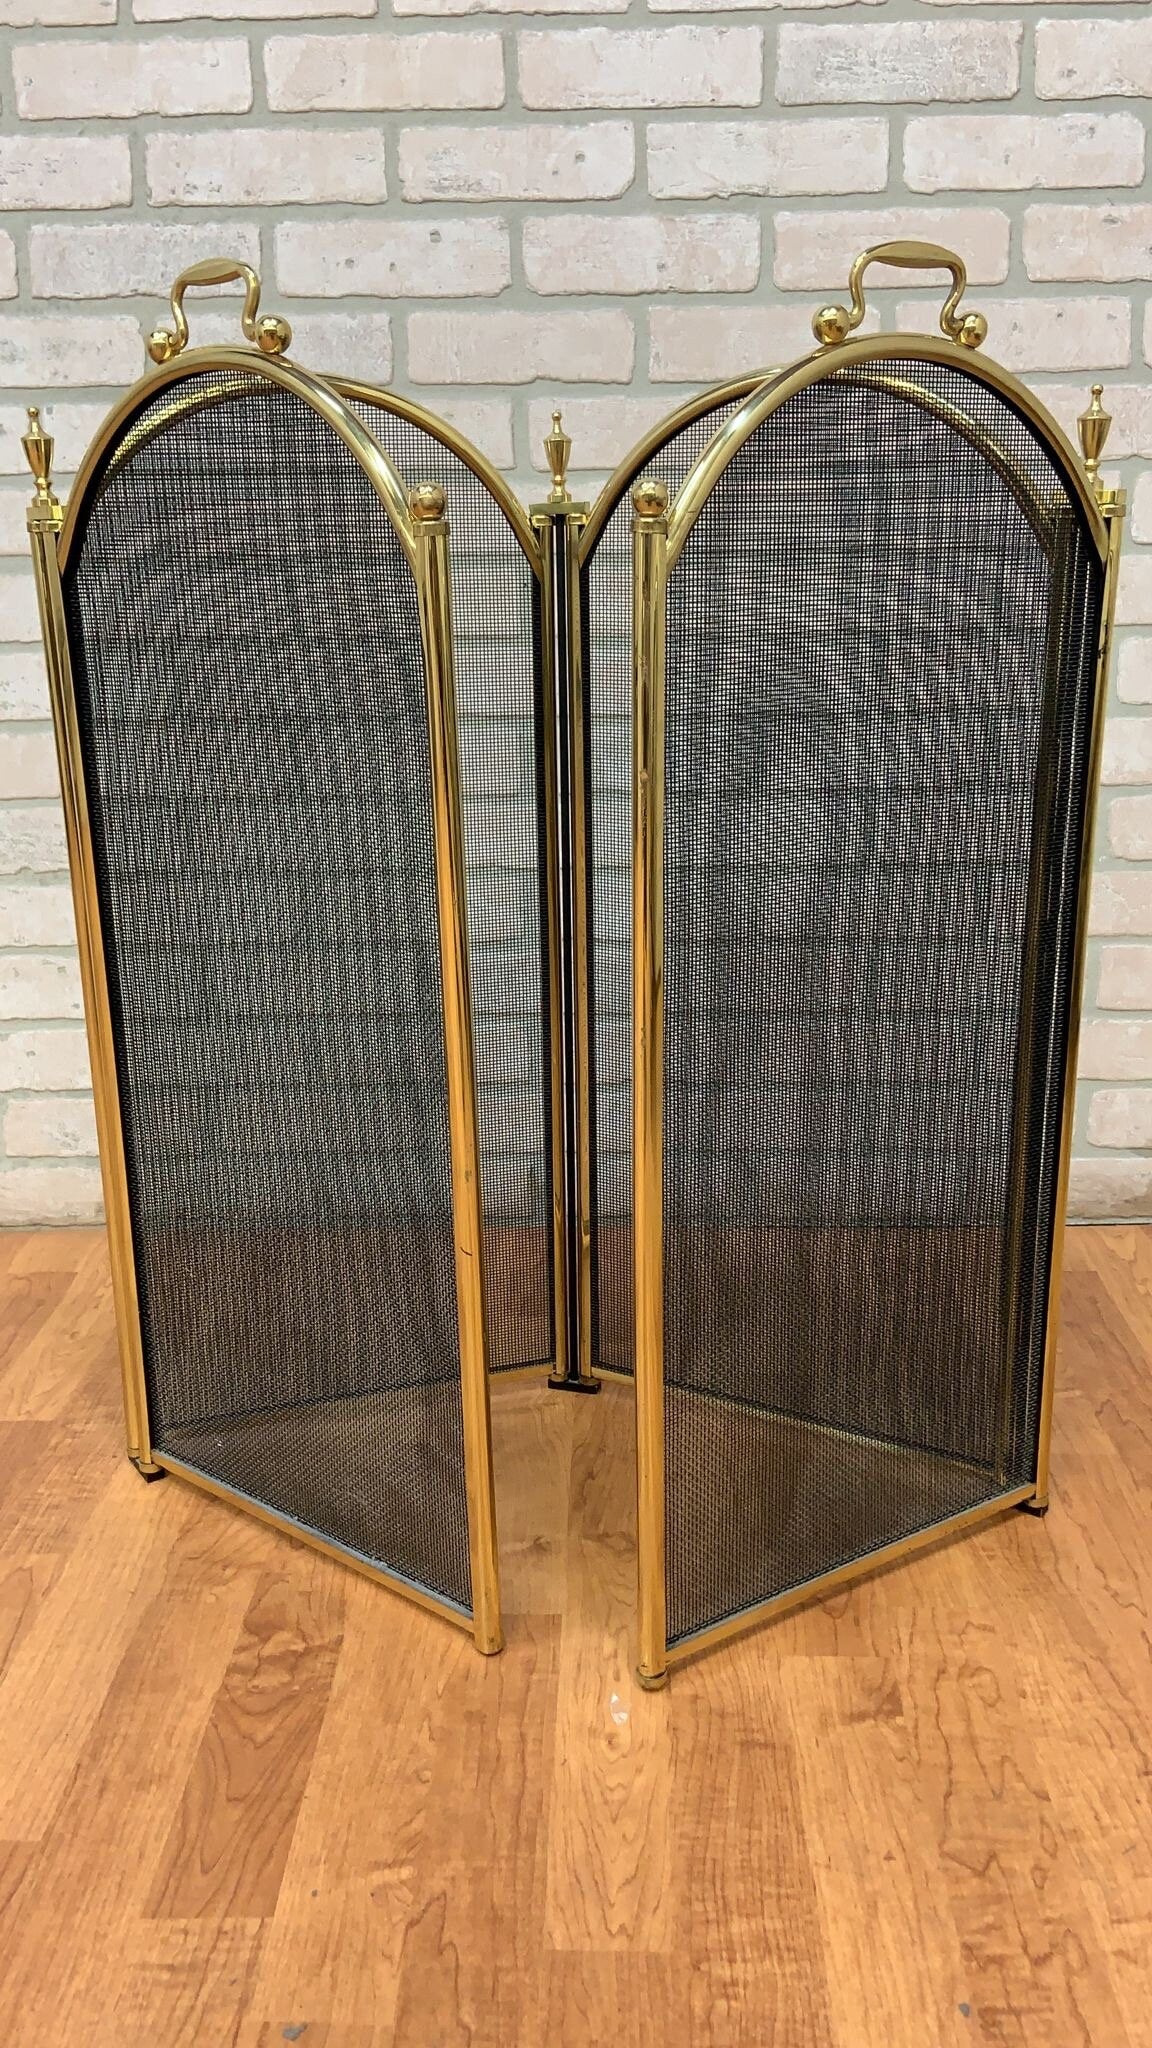 Vintage Mid Century Modern Black Mesh with Brass Ball Handles Finials Folding 4 Panel  Hearth Accessory Fire Place Decor